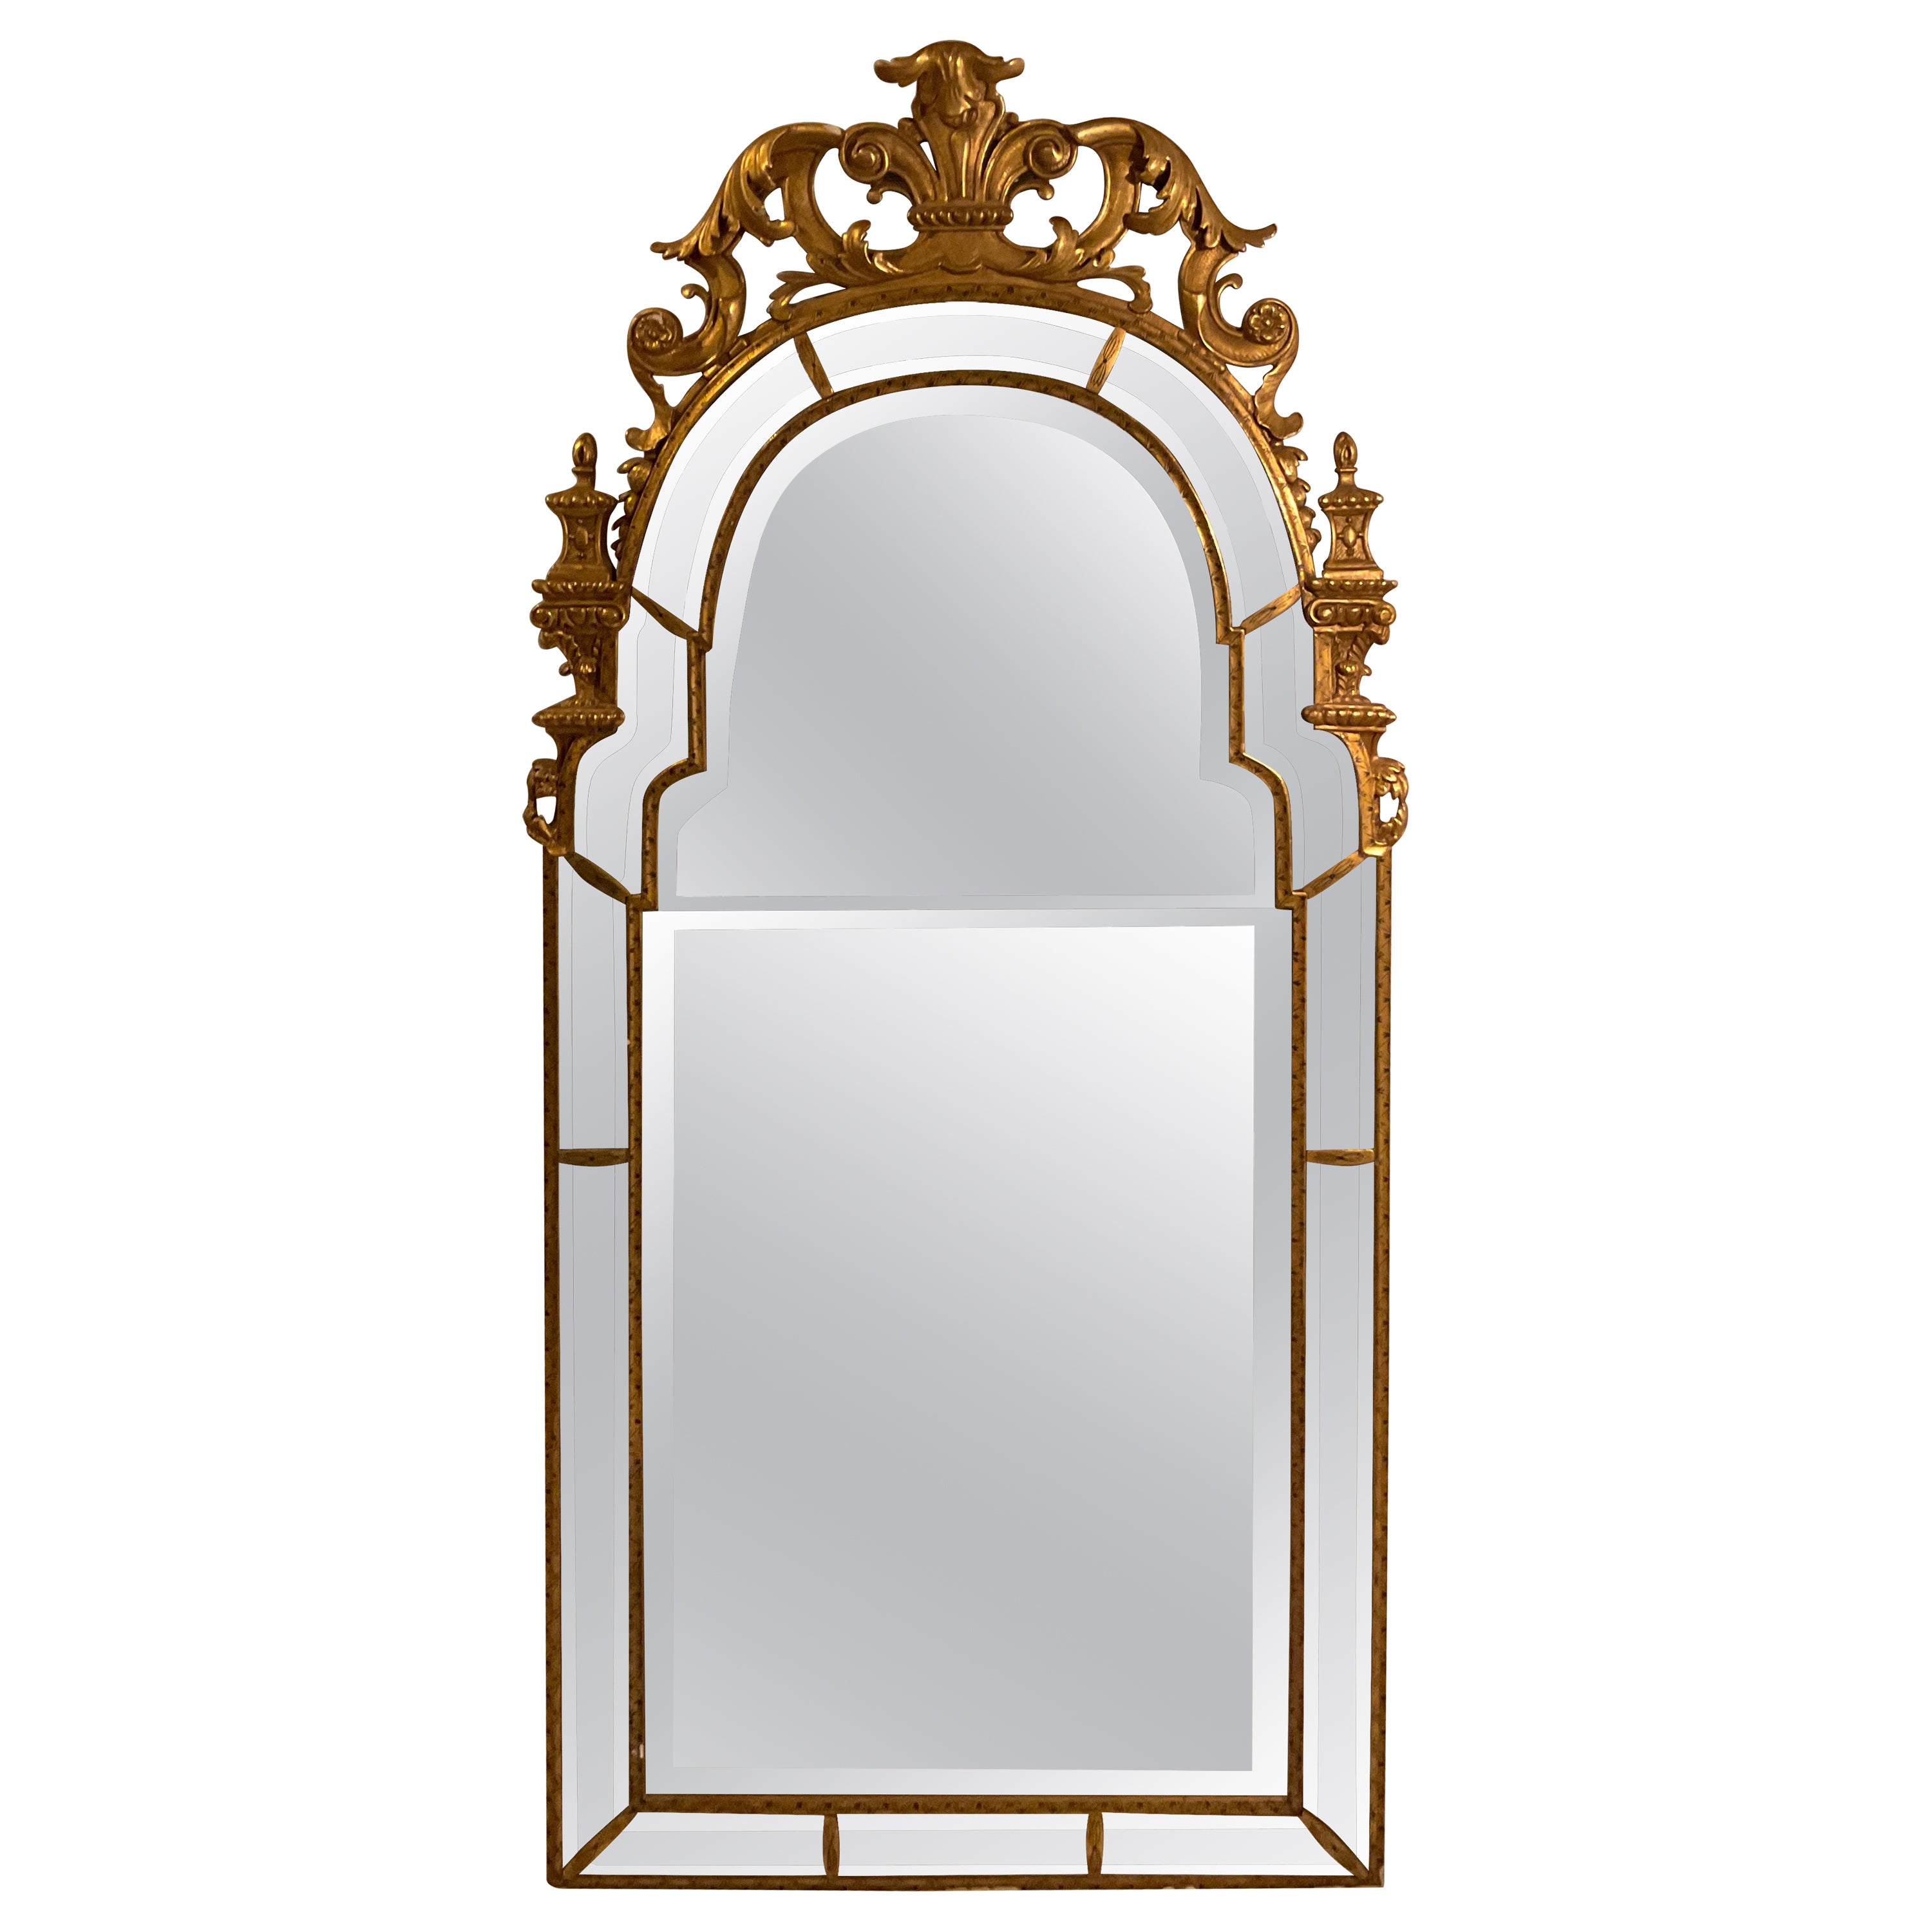 Queen Anne French Style Mirror By Mirror Fair For Sale